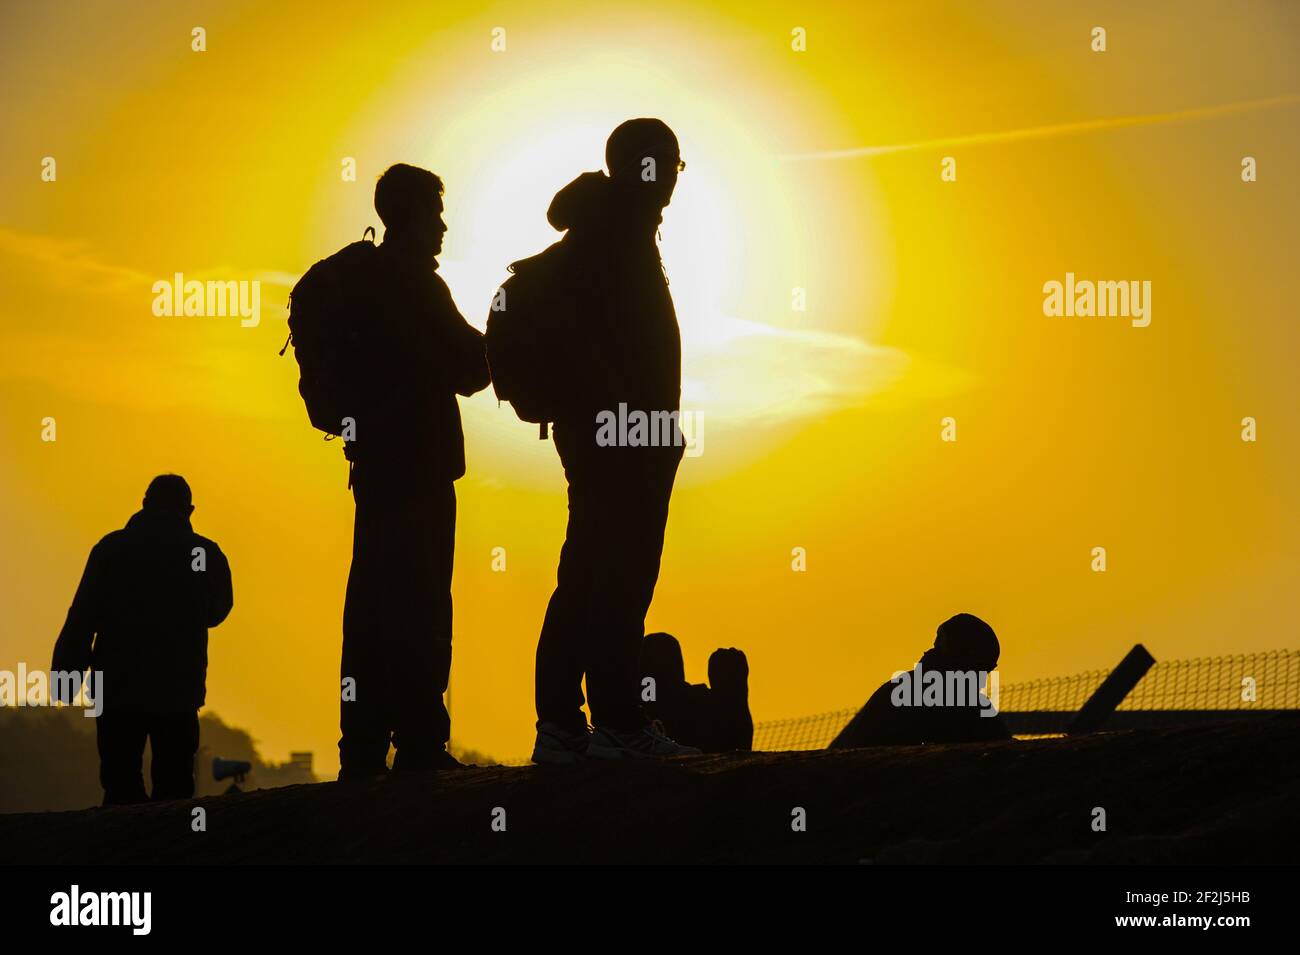 Spectators at a racing circuit at dawn silhouetted by the rising golden sun Stock Photo